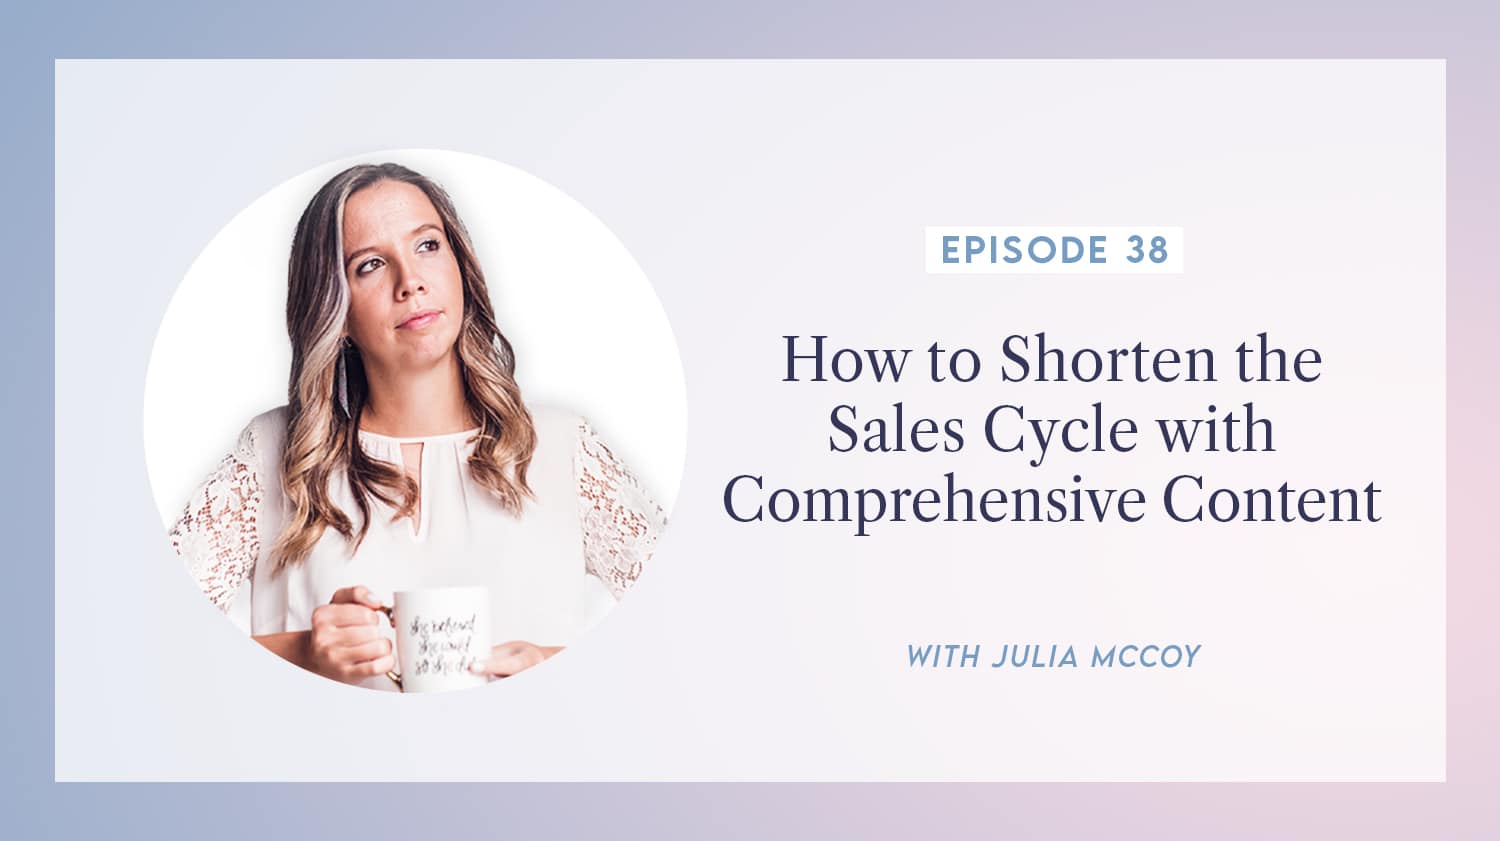 content transformation podcast with julia mccoy episode 38 how to shorten the sales cycle with comprehensive content